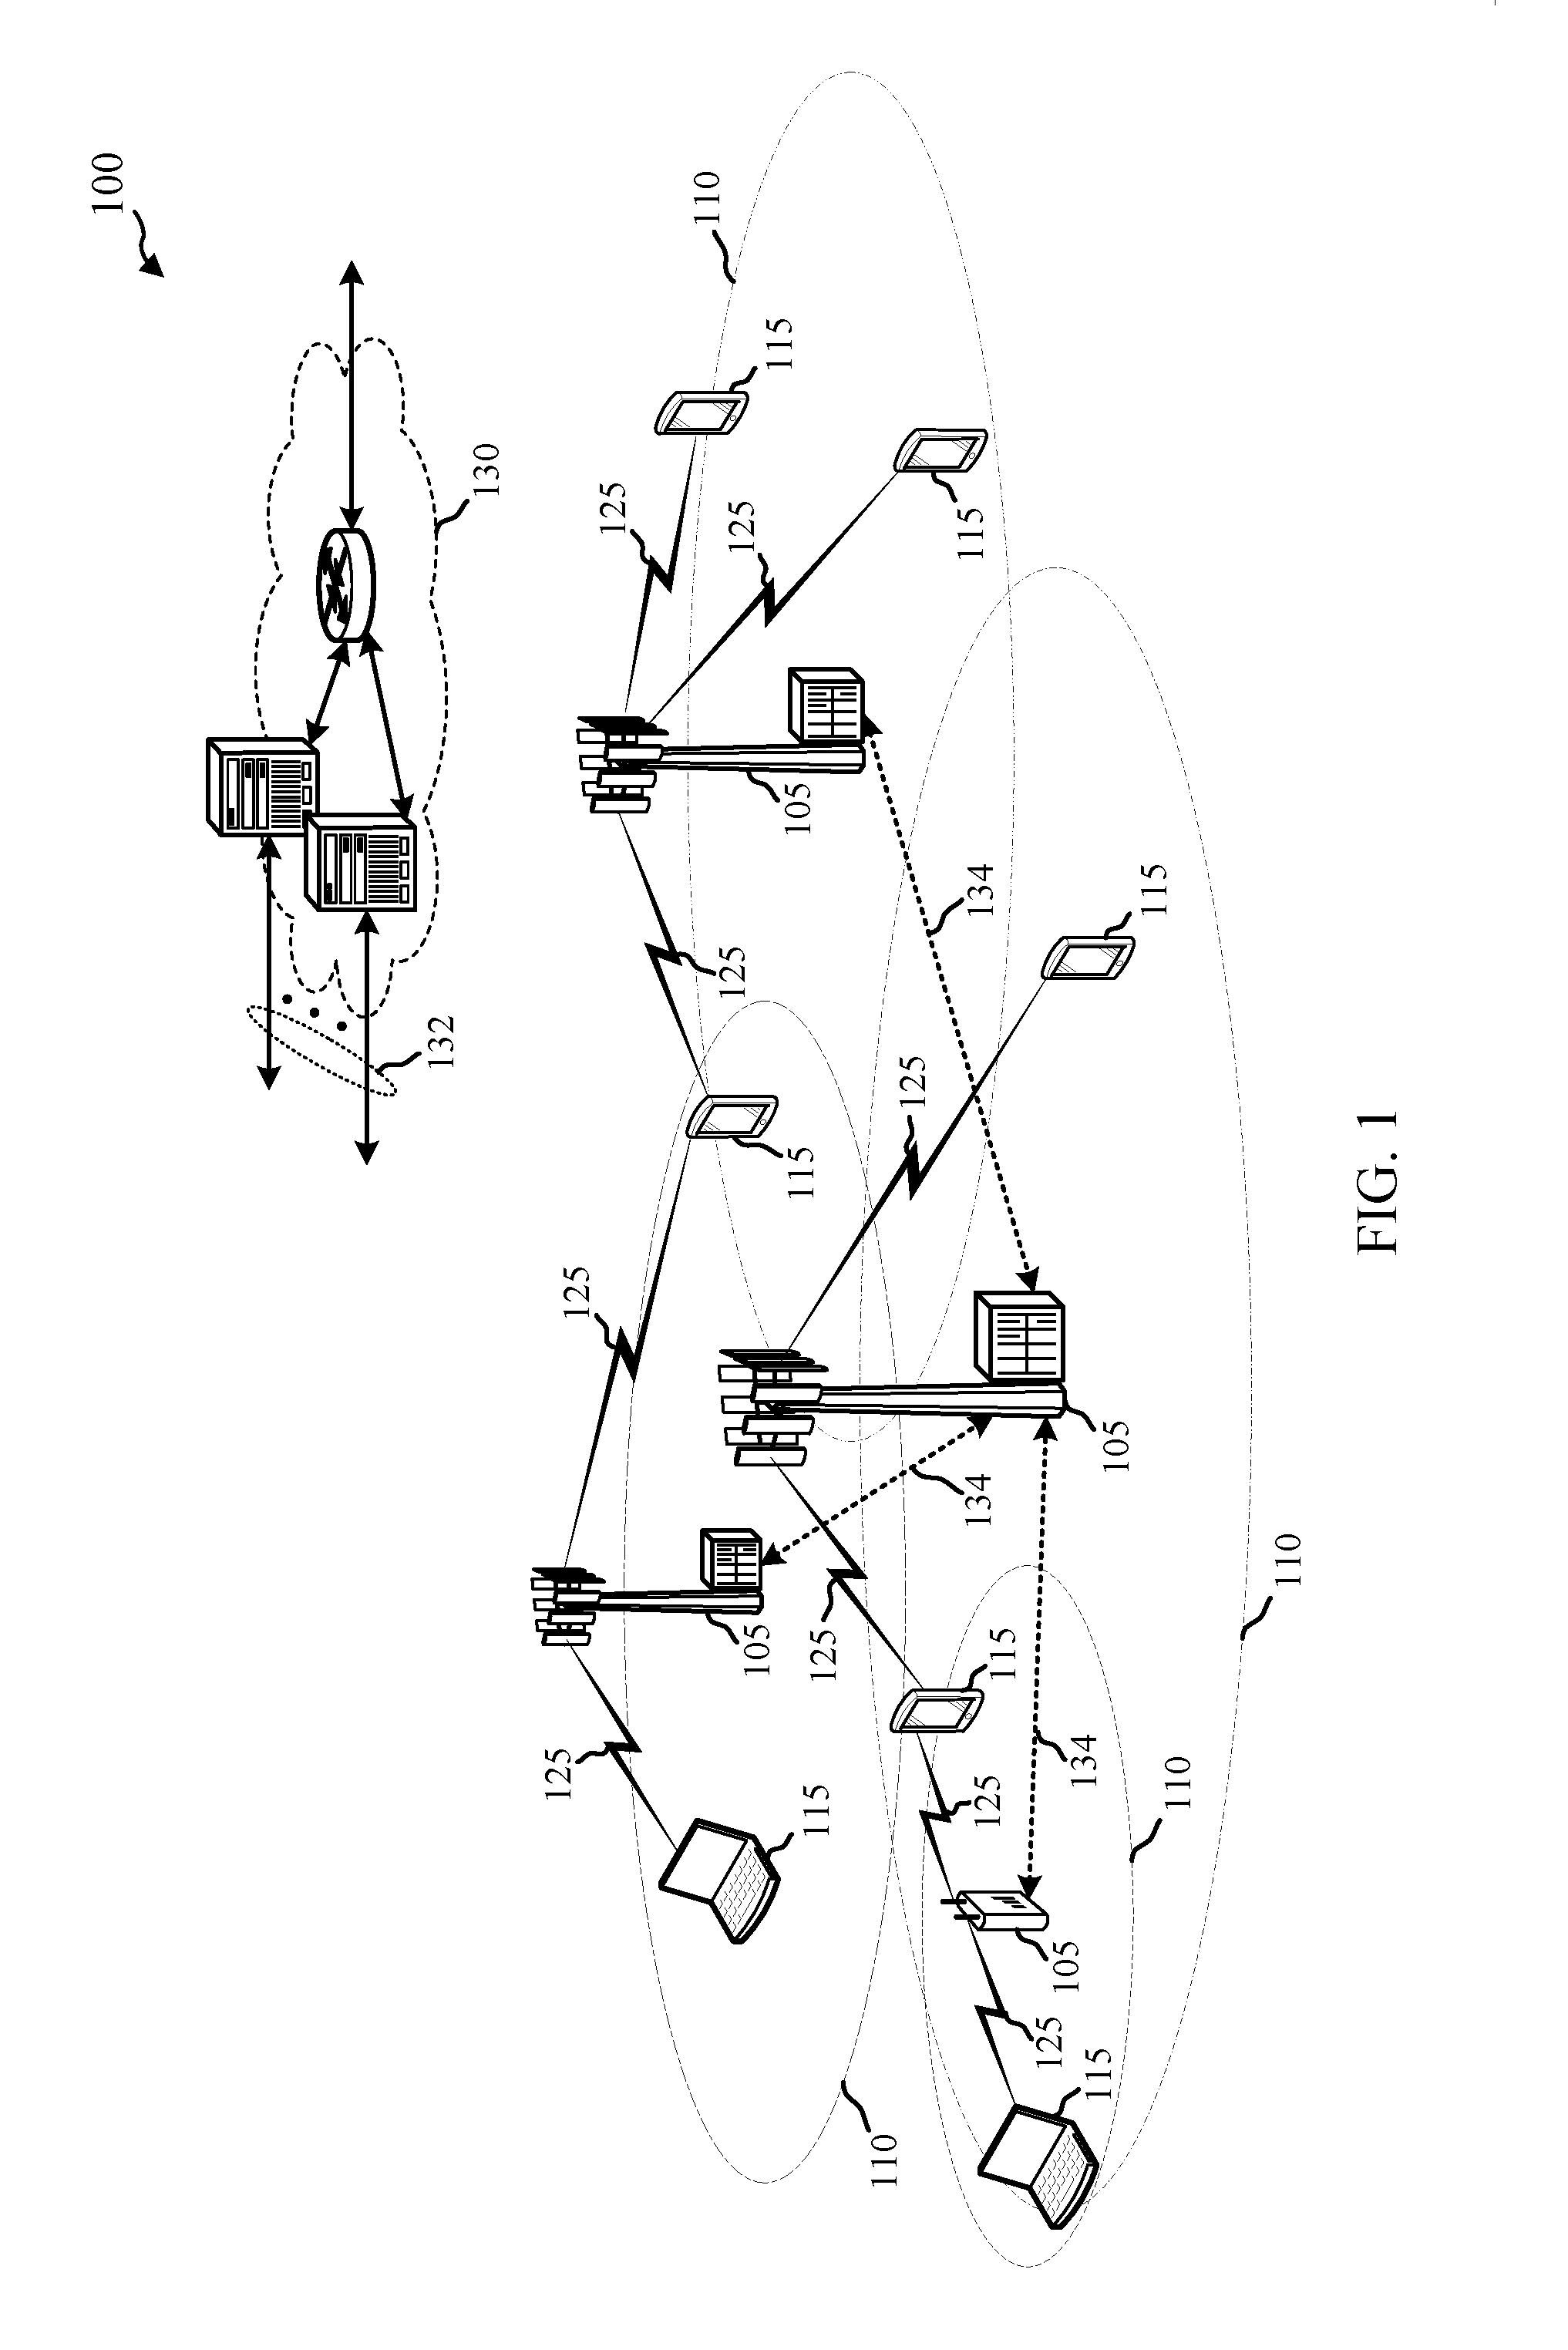 Antenna structures for wireless communications